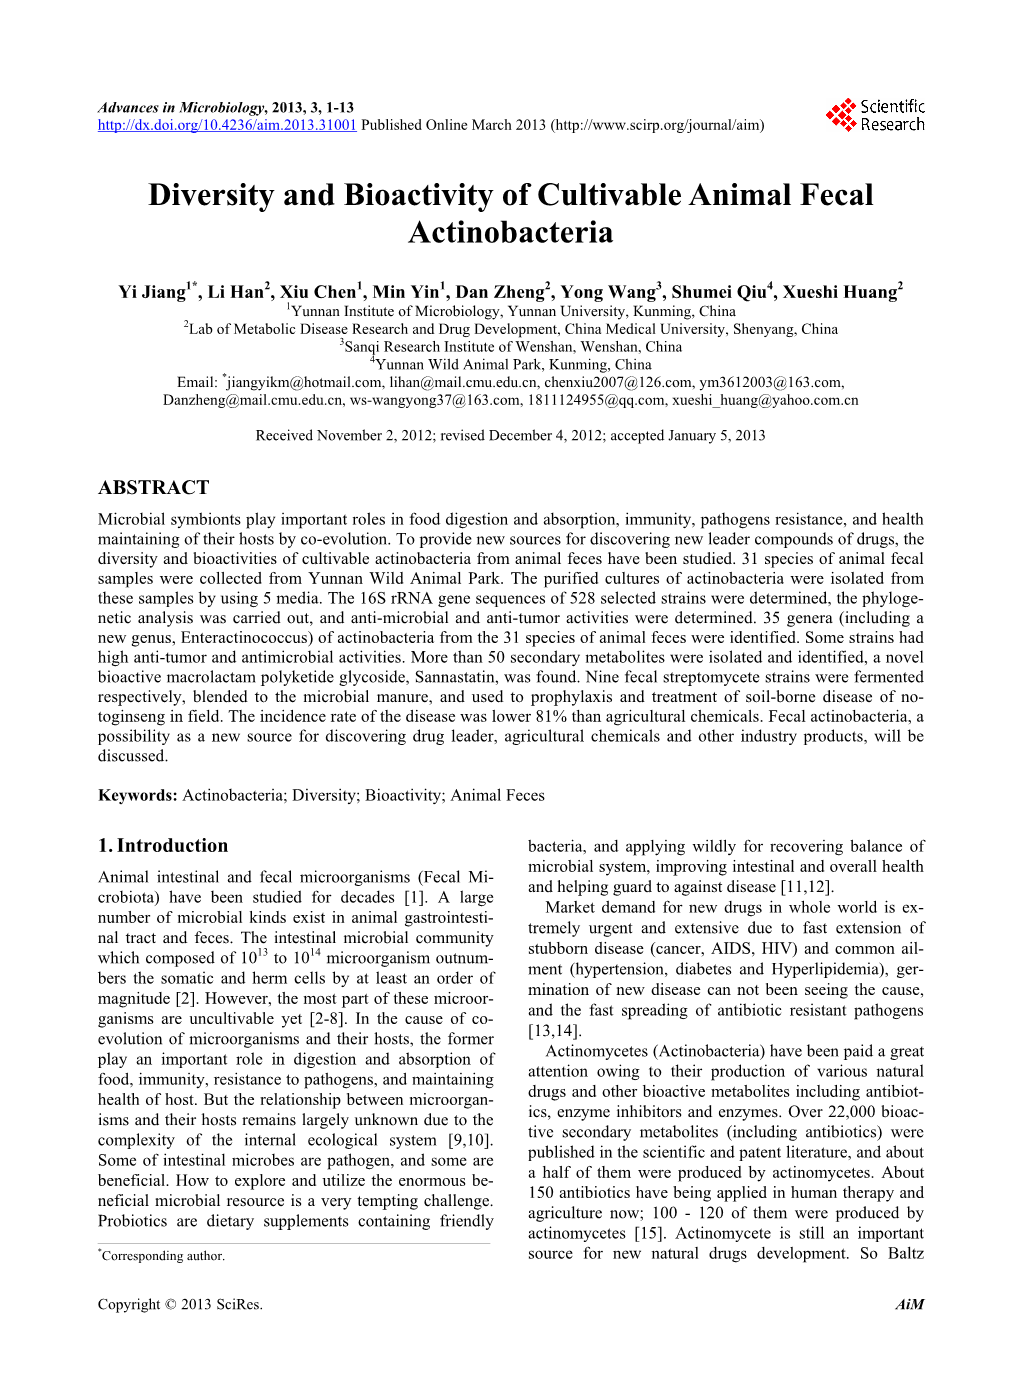 Diversity and Bioactivity of Cultivable Animal Fecal Actinobacteria